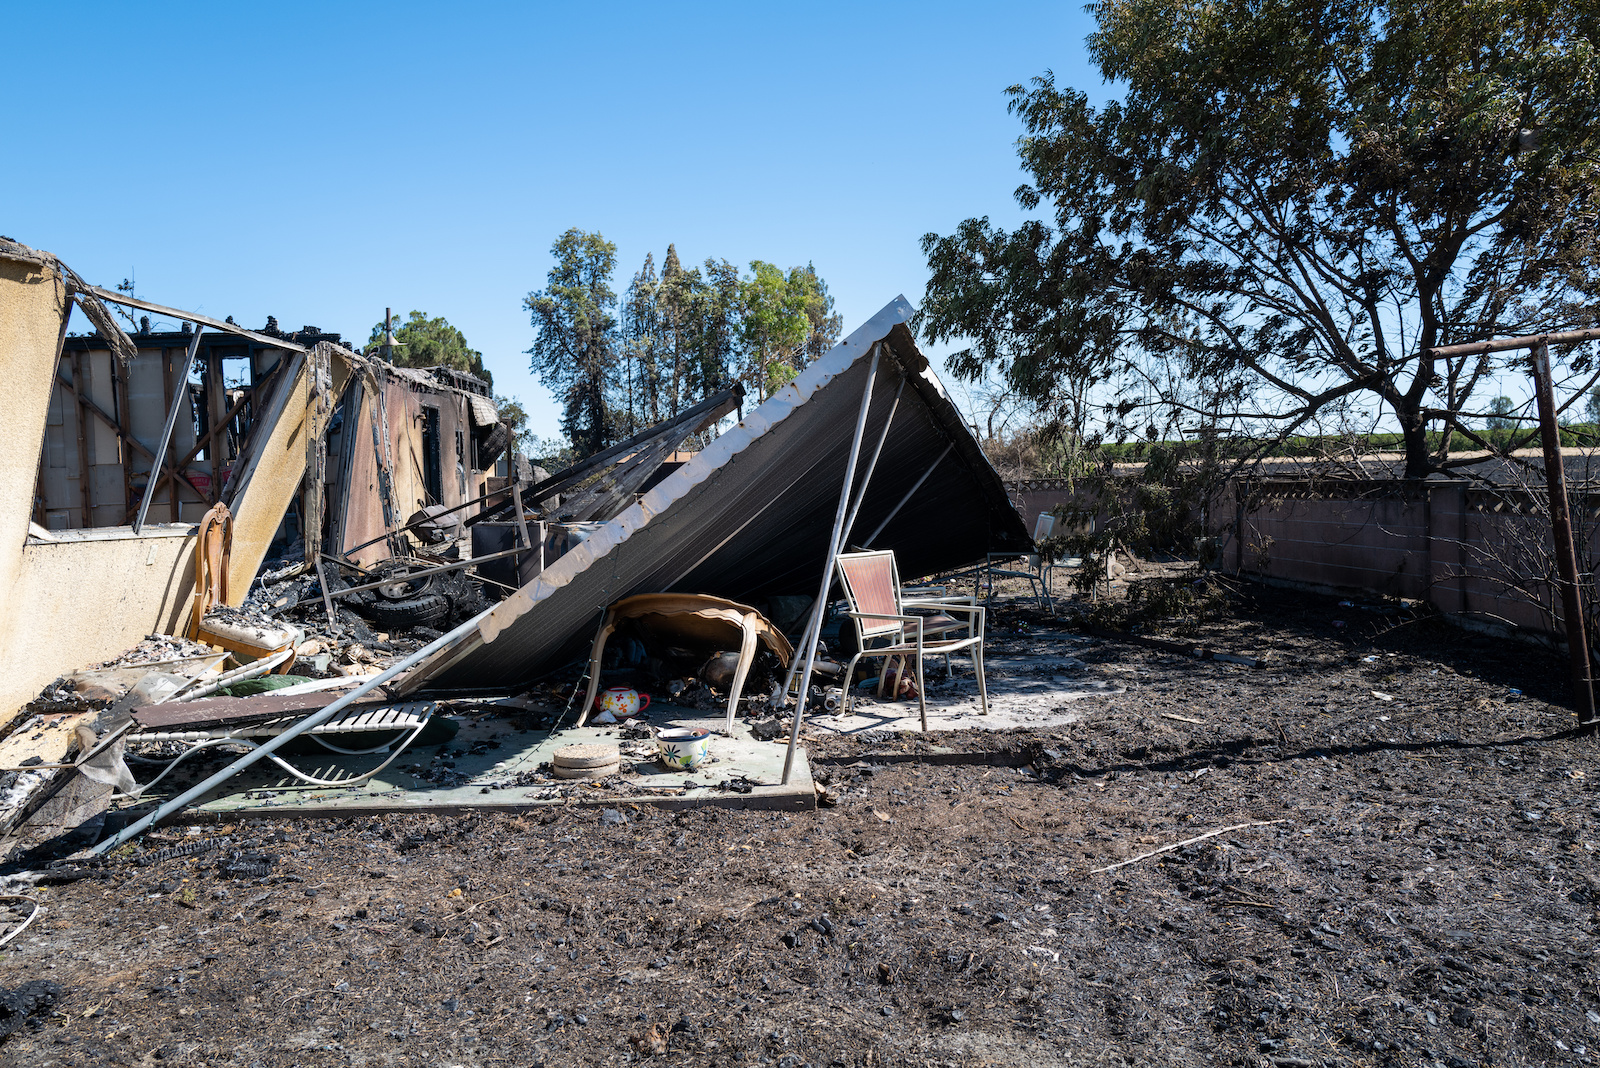 The remains of a home that burned are left abandoned on July 04, 2022 in Fresno, California.